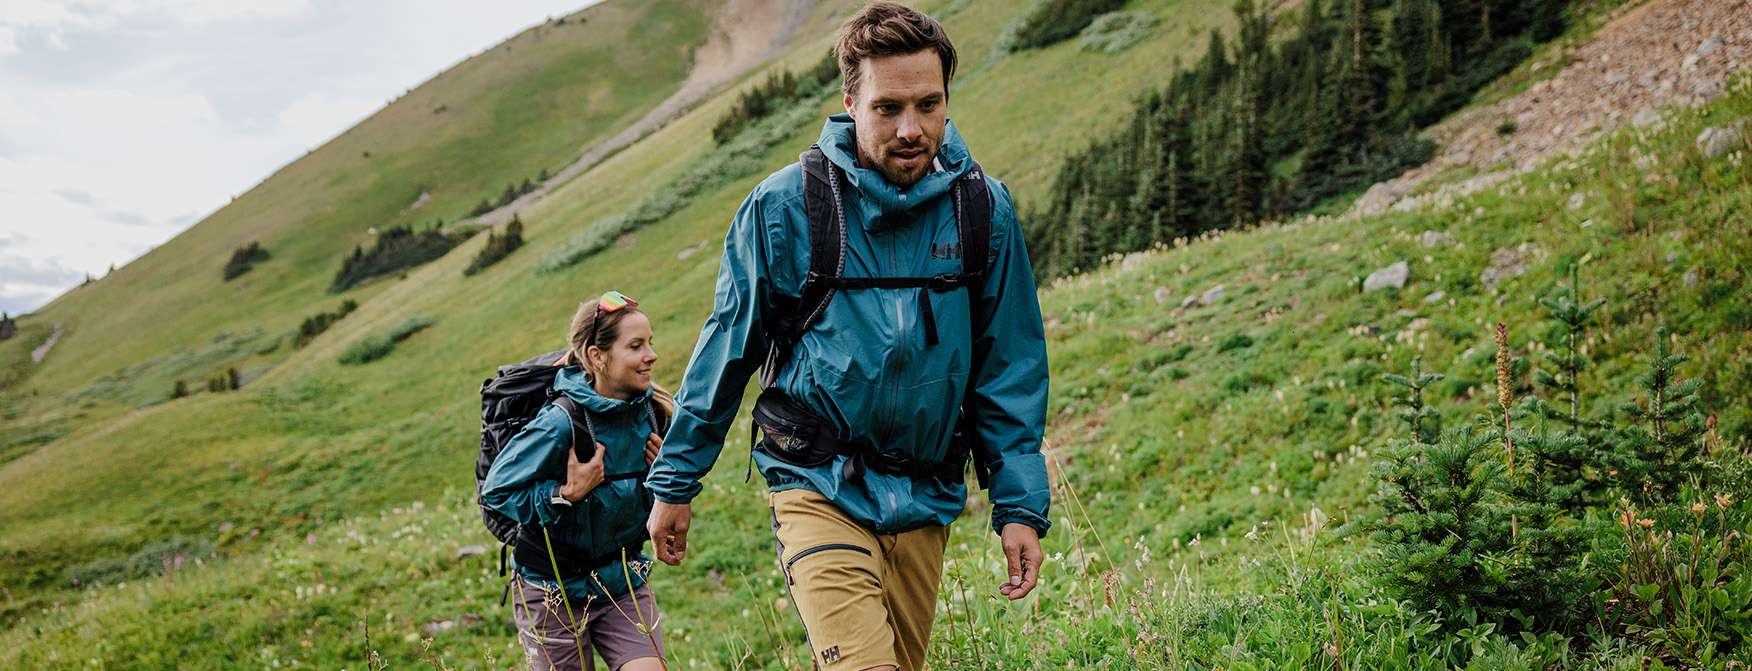 man and woman hiking in scenic nature